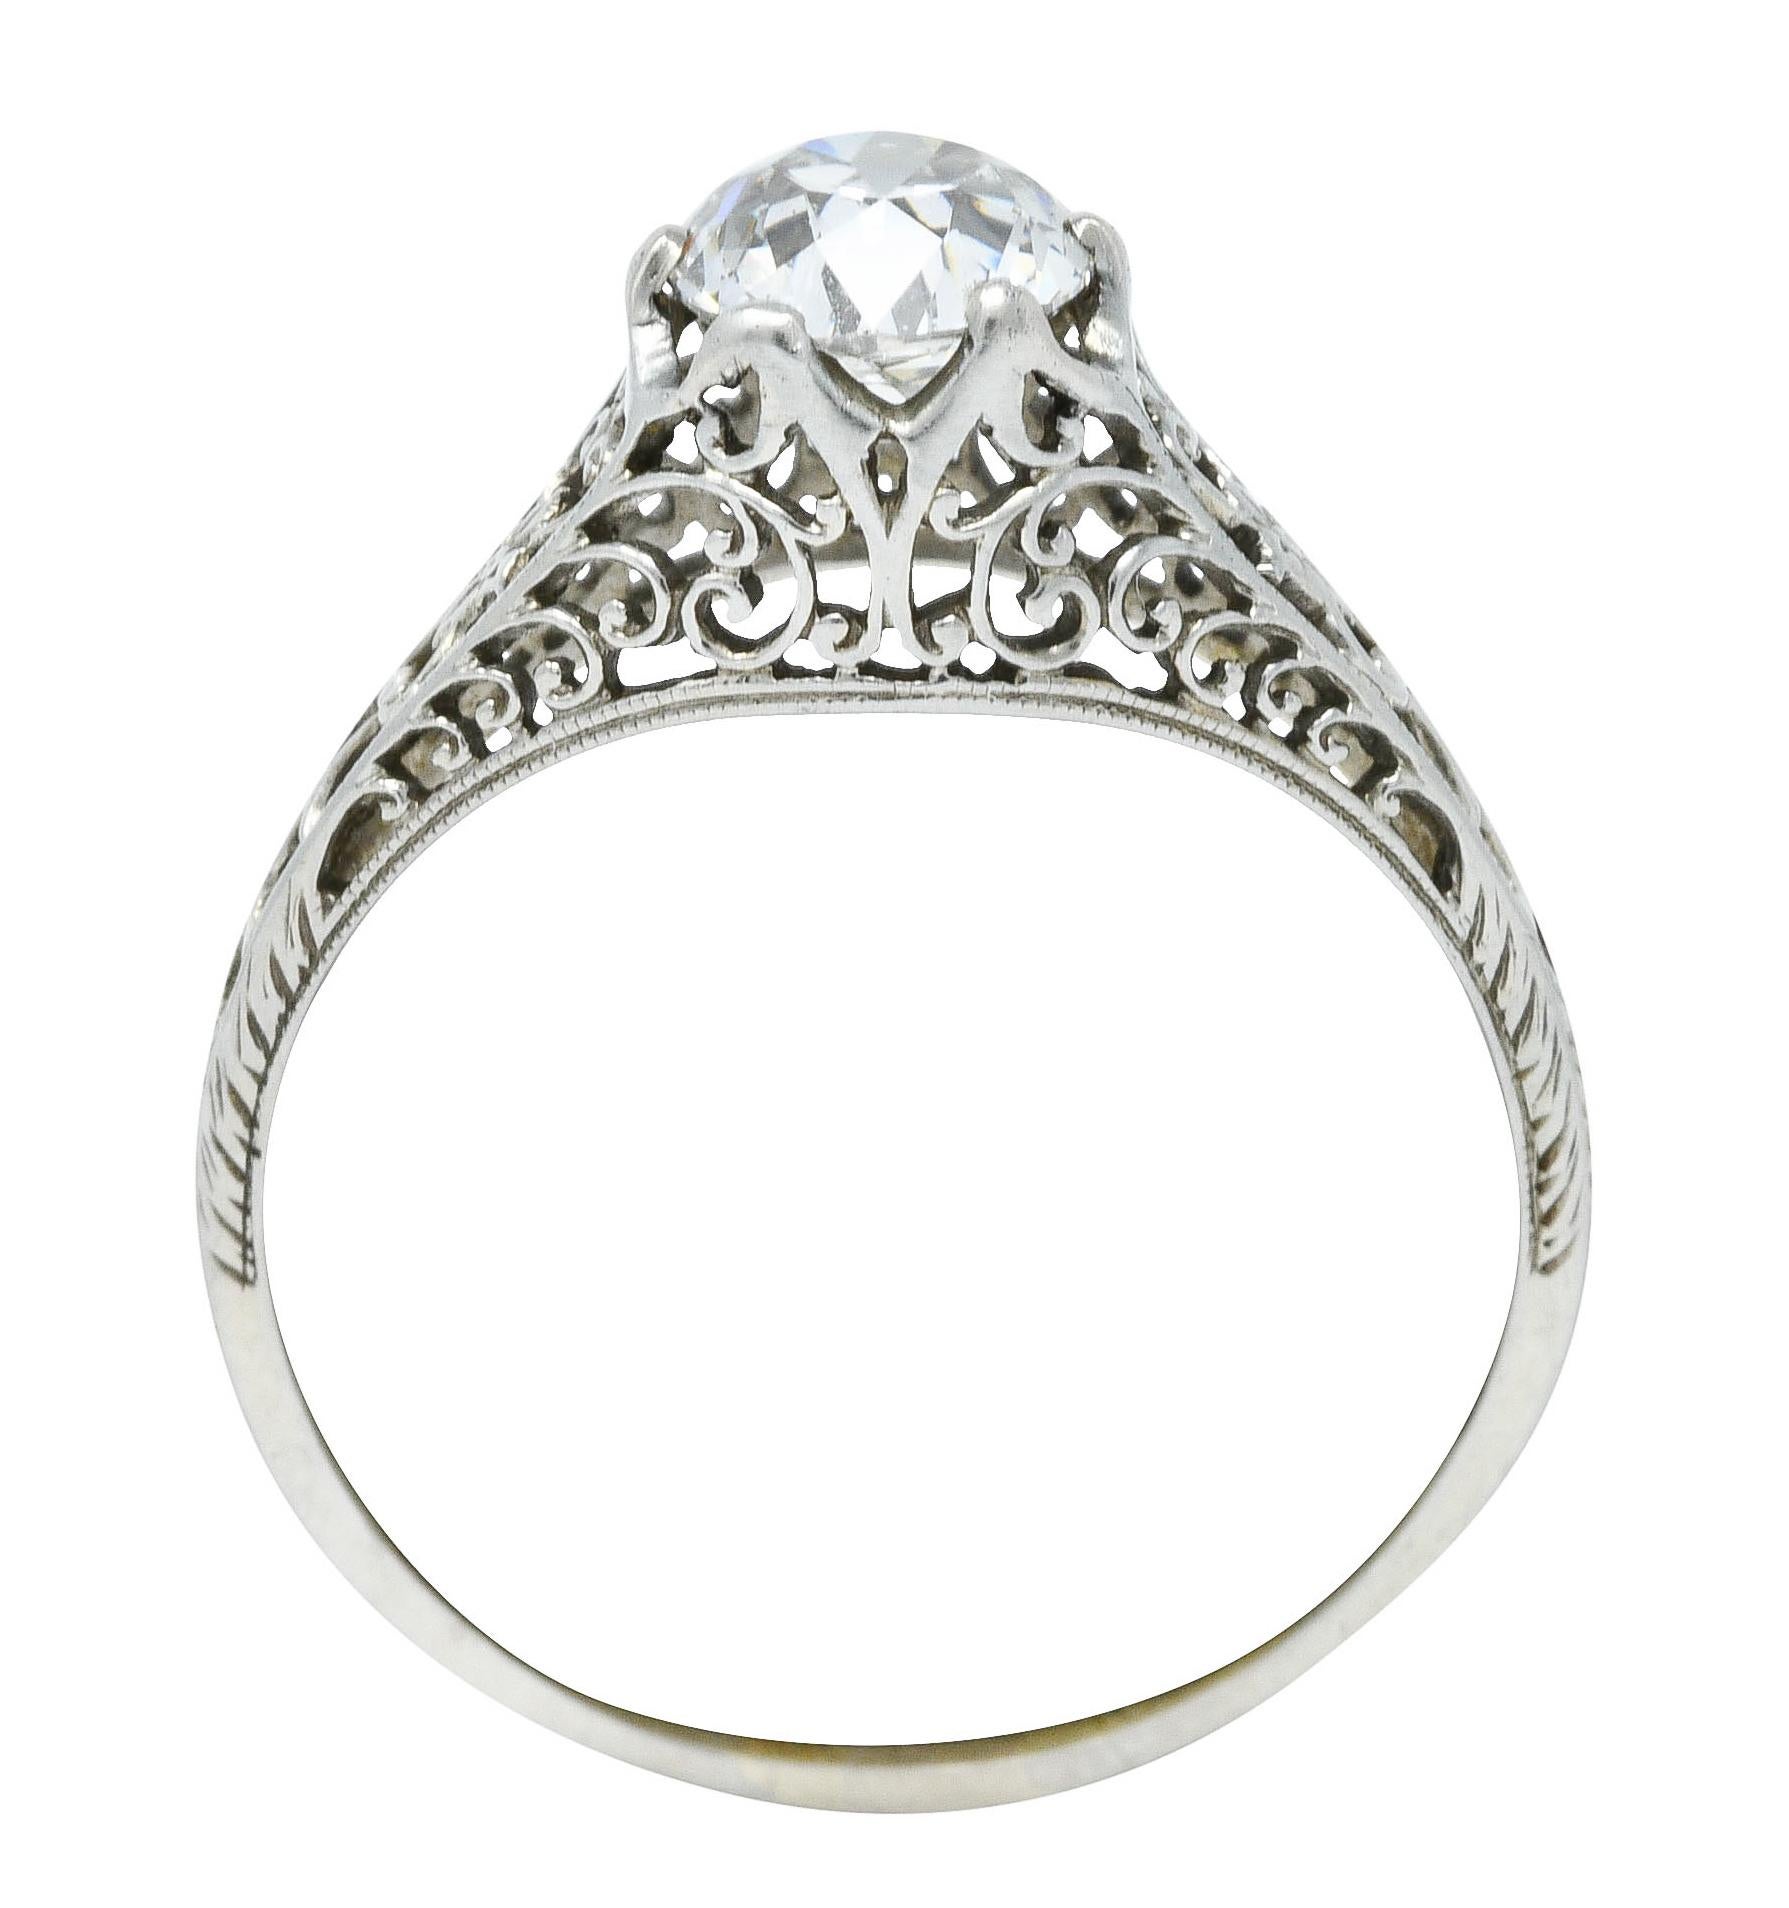 Centering an old mine cut diamond weighing 1.10 carats - J color with VS1 clarity

Set in a pierced filigree mounting with a scrolling design throughout

Completed by foliate accents at shoulders and shank

Stamped 18K-W for 18 karat white